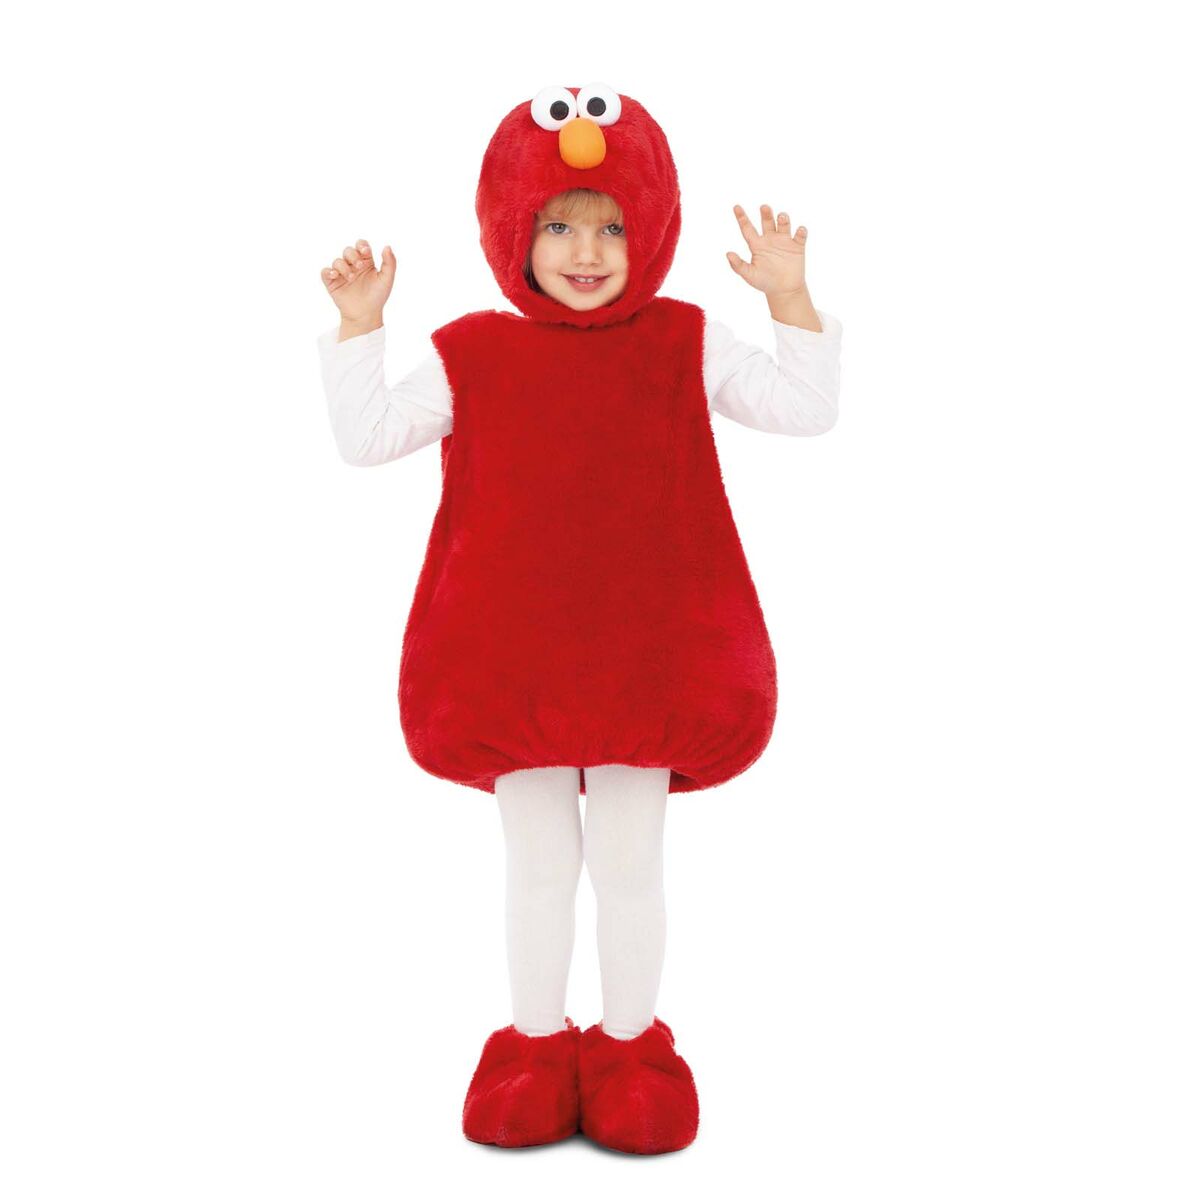 Costume for Children My Other Me Elmo Sesame Street (3 Pieces)